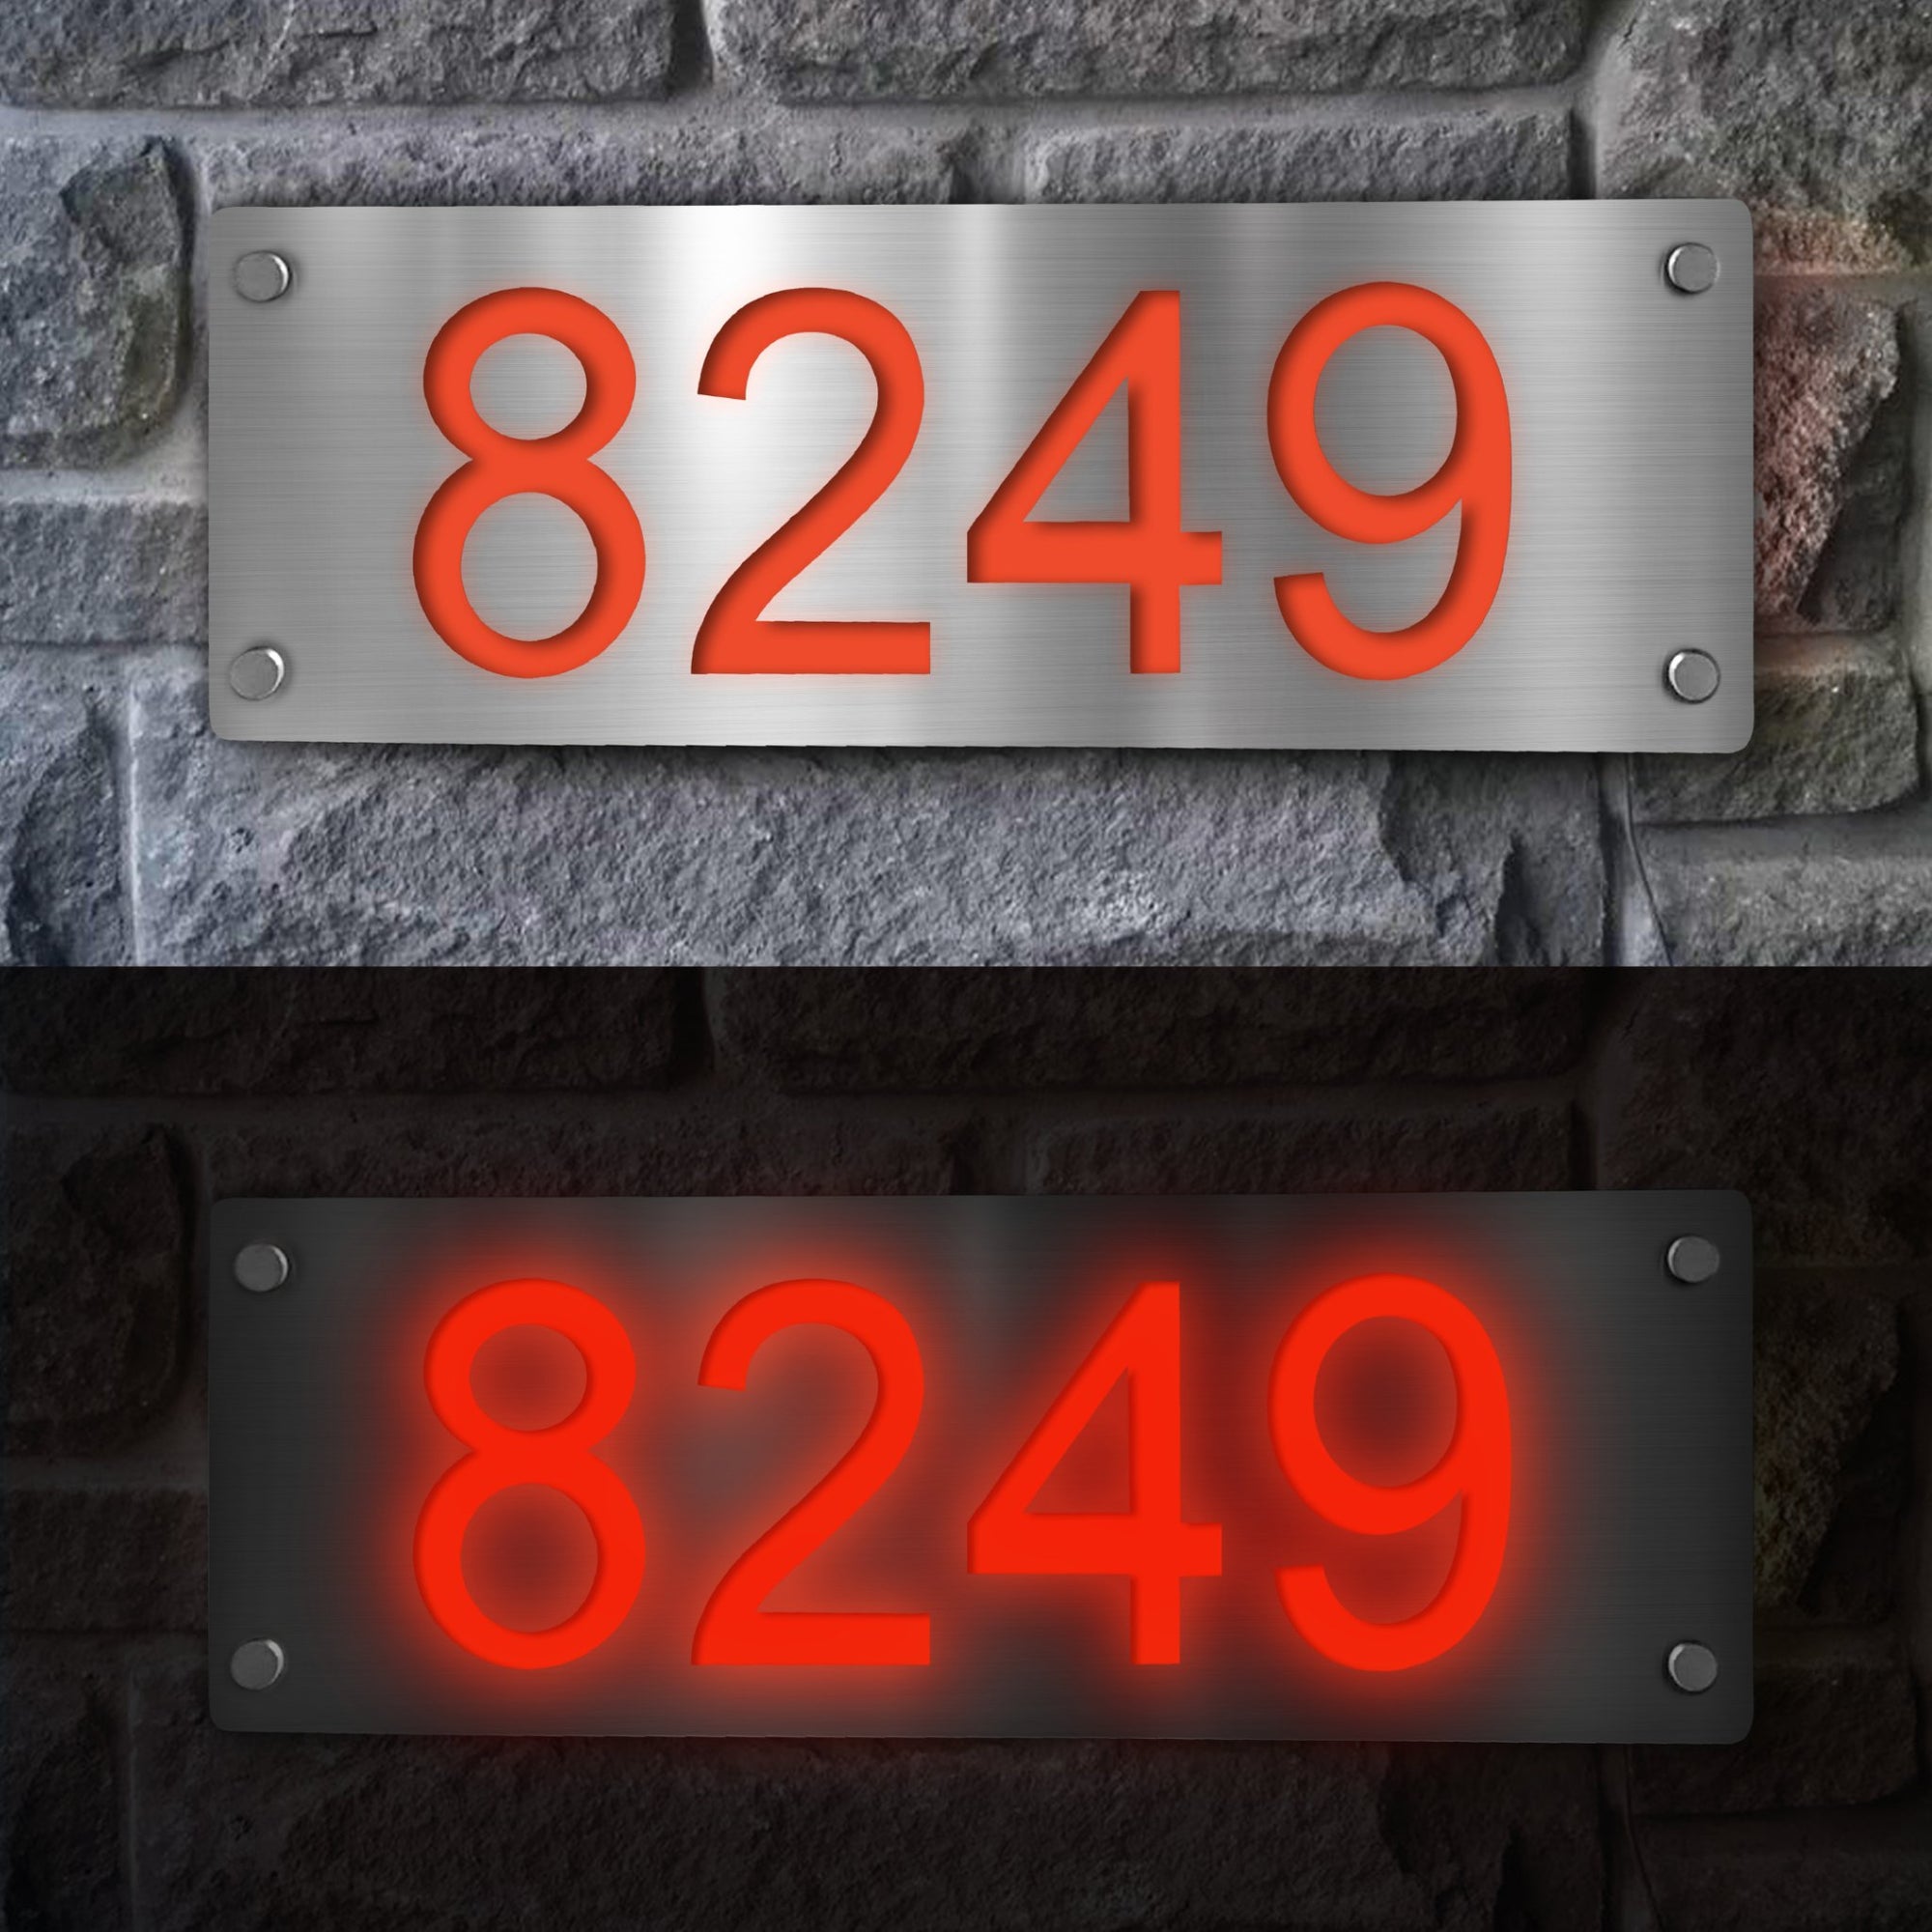 Lighted Horizontal House Number Sign in Vibrant ORANGE - Stainless Steel with Premium Address Numbers Cutout. Essential for quick and efficient home location by emergency services, delivery drivers, and guests.